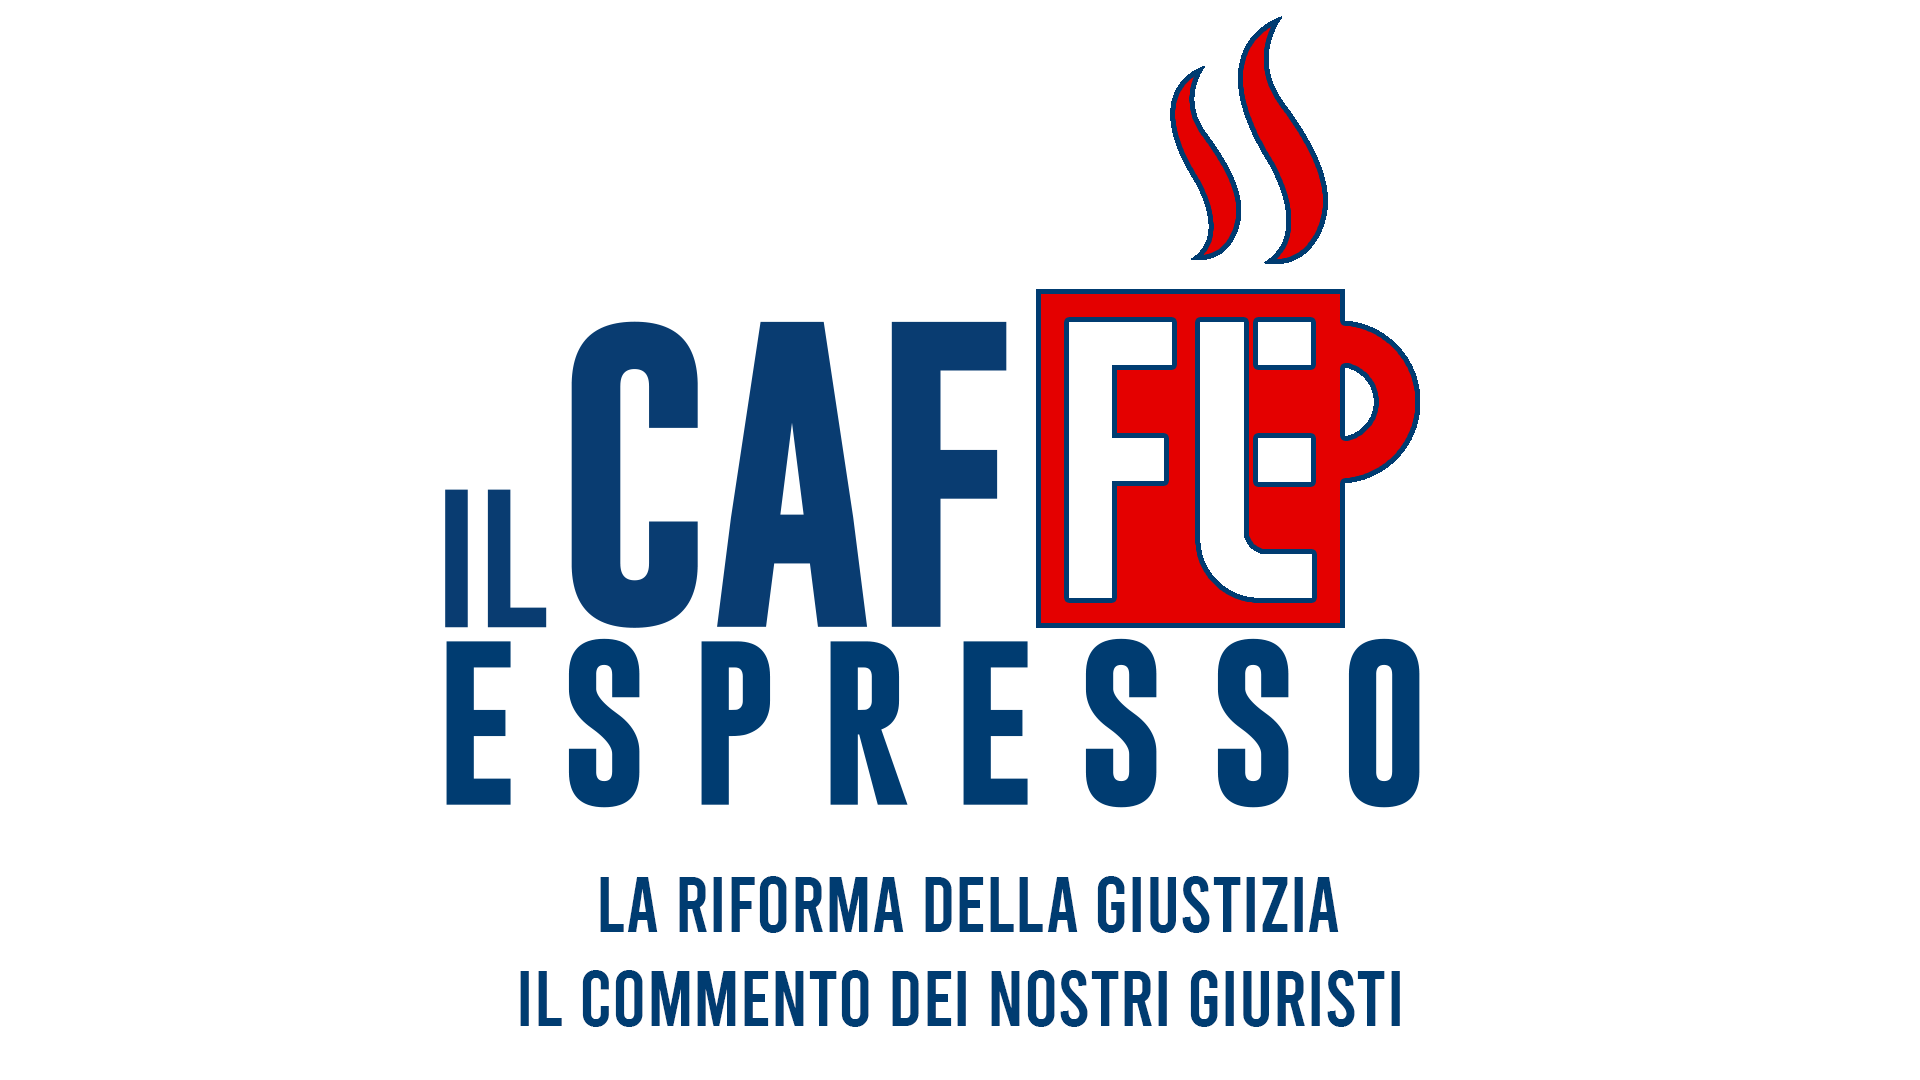 #ilcafFLEespresso – Justice Reform. A comment from our lawyers